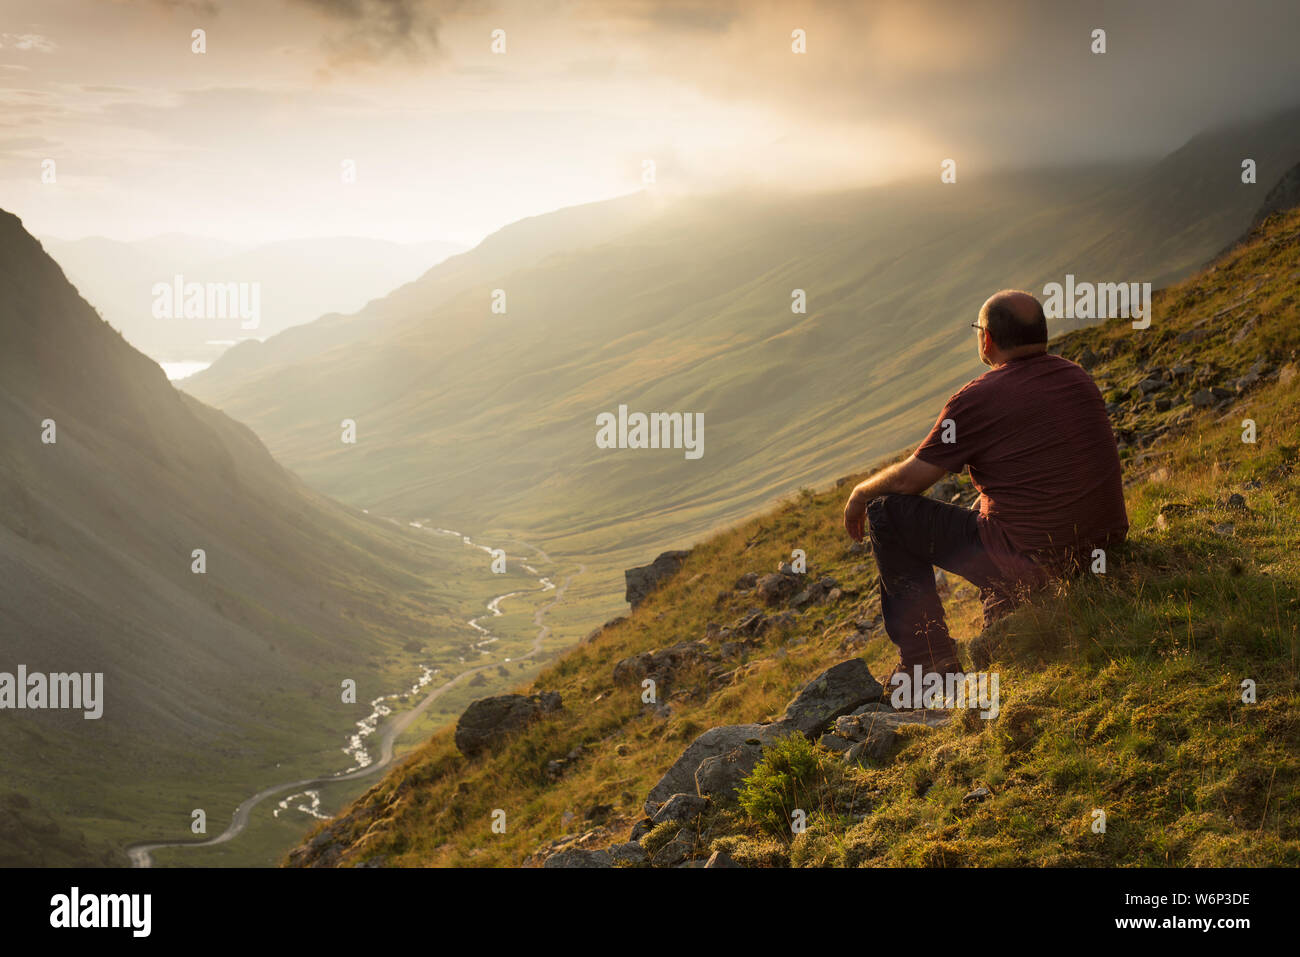 A man looks out over Honister Pass in the North Western Fells of the Lake District, UK Stock Photo